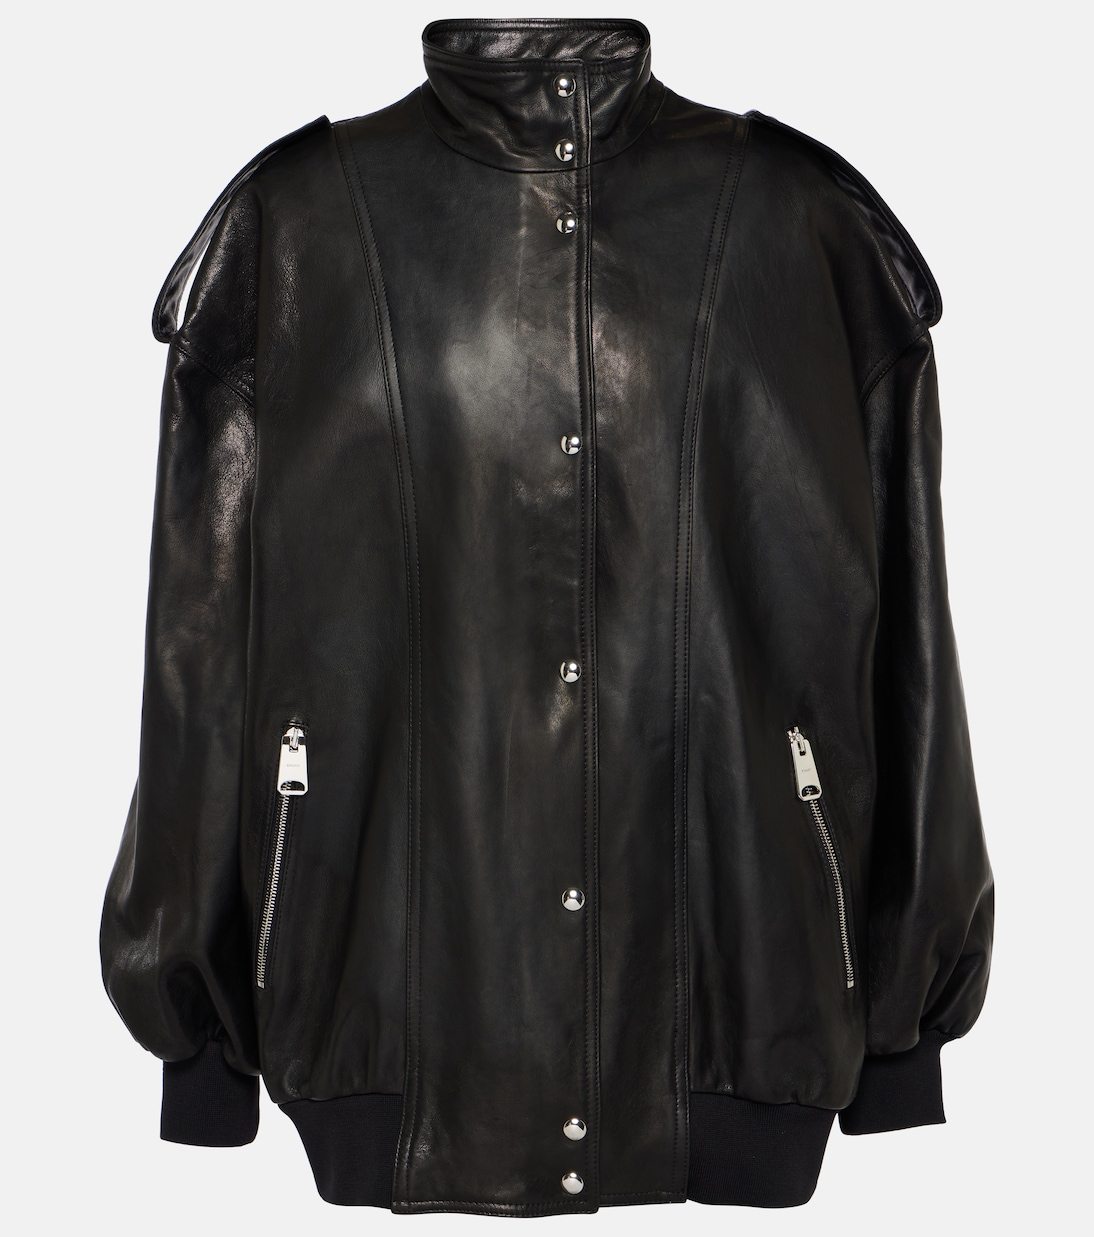 A black leather jacket with silver buttons Description automatically generated